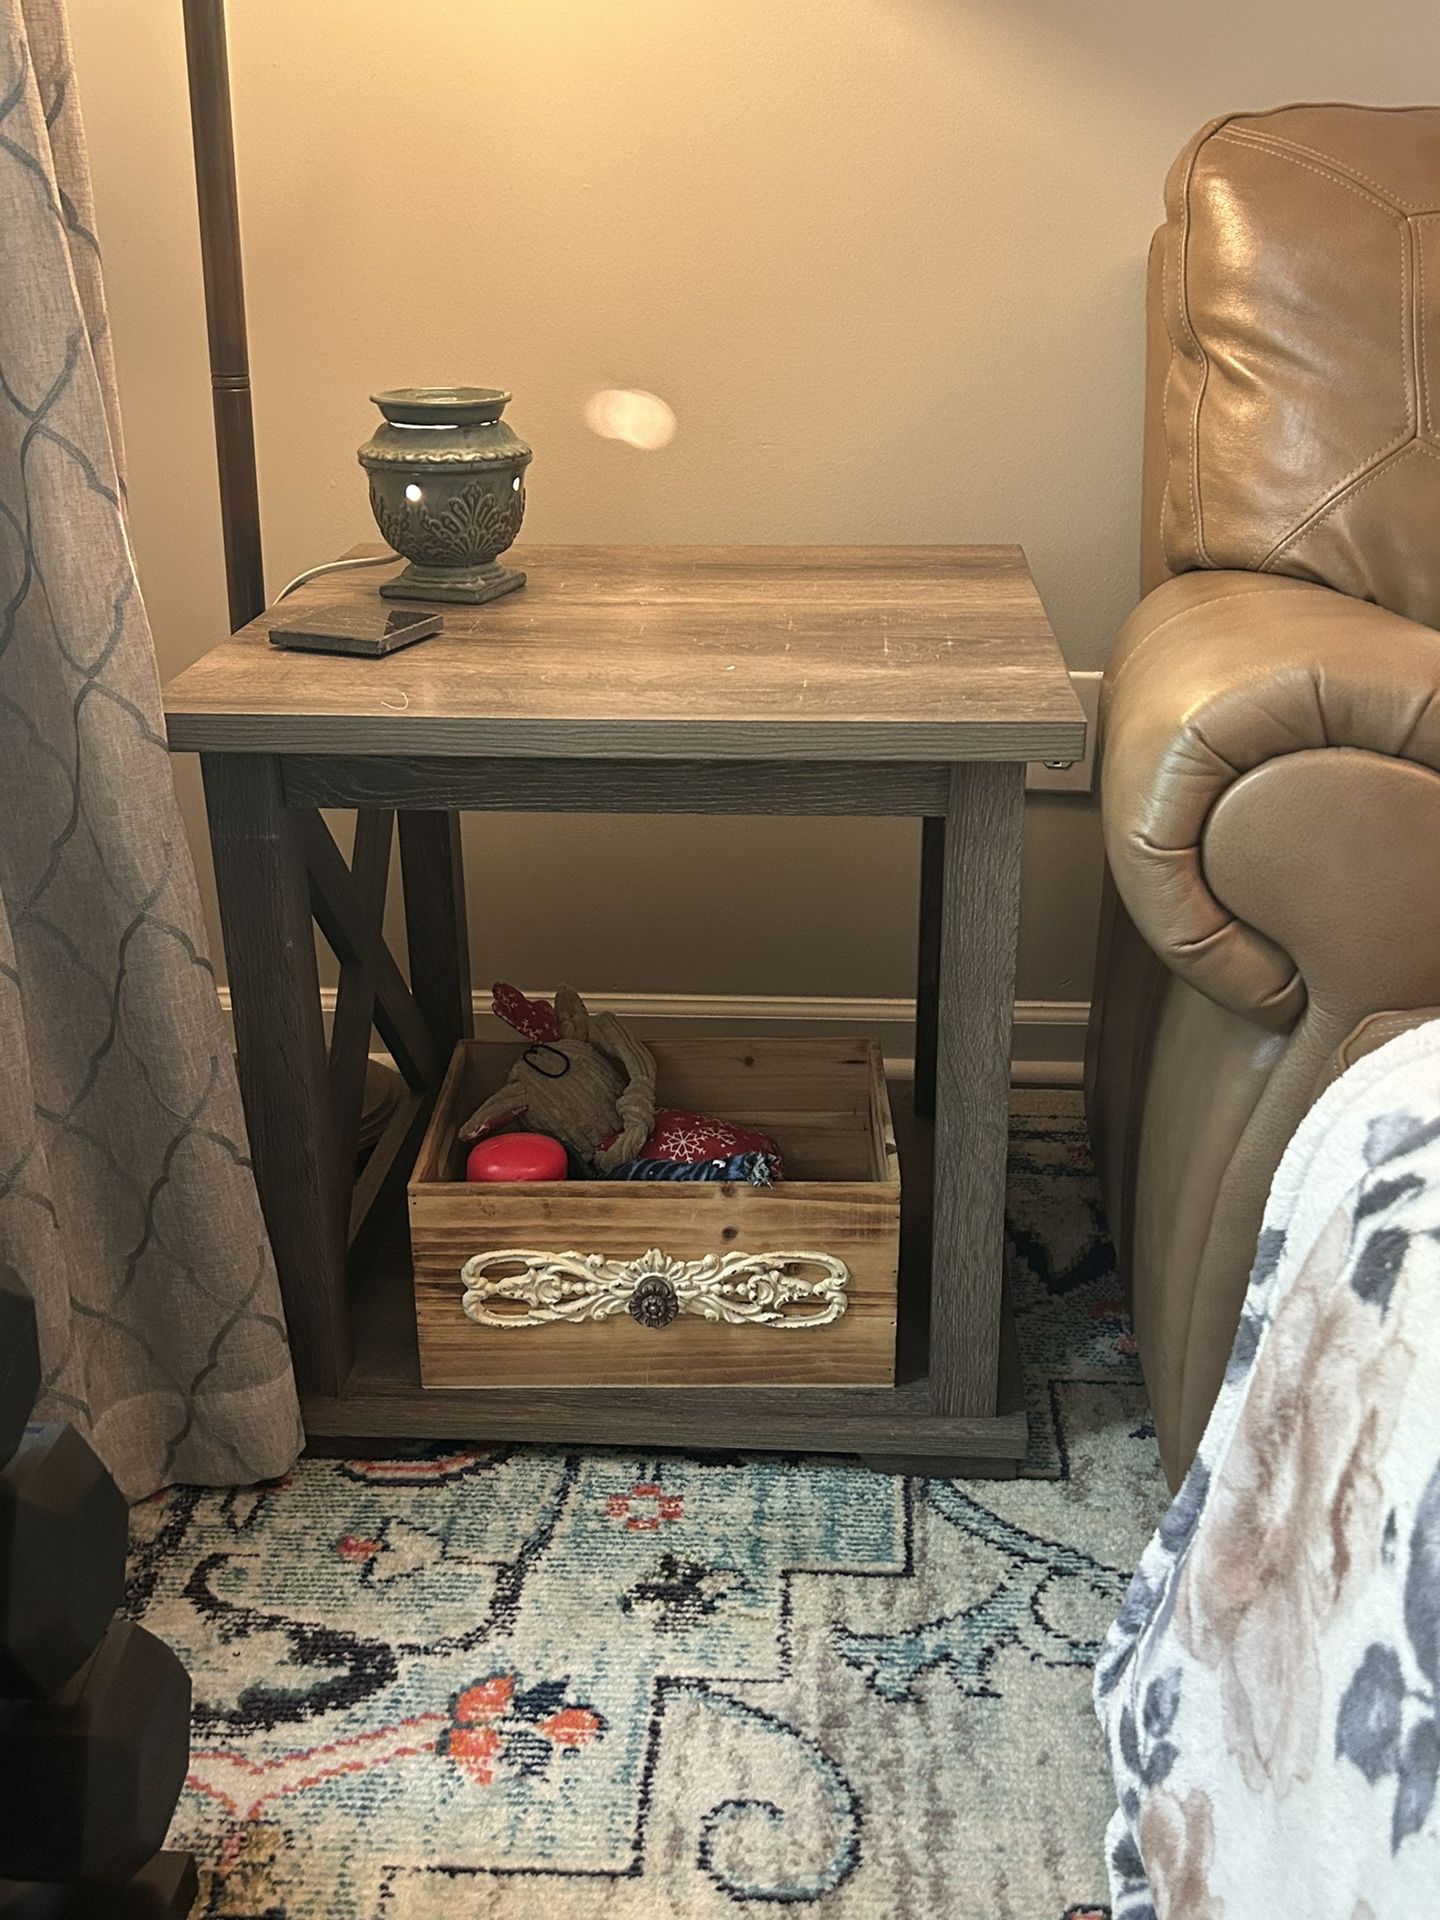 End Tables 